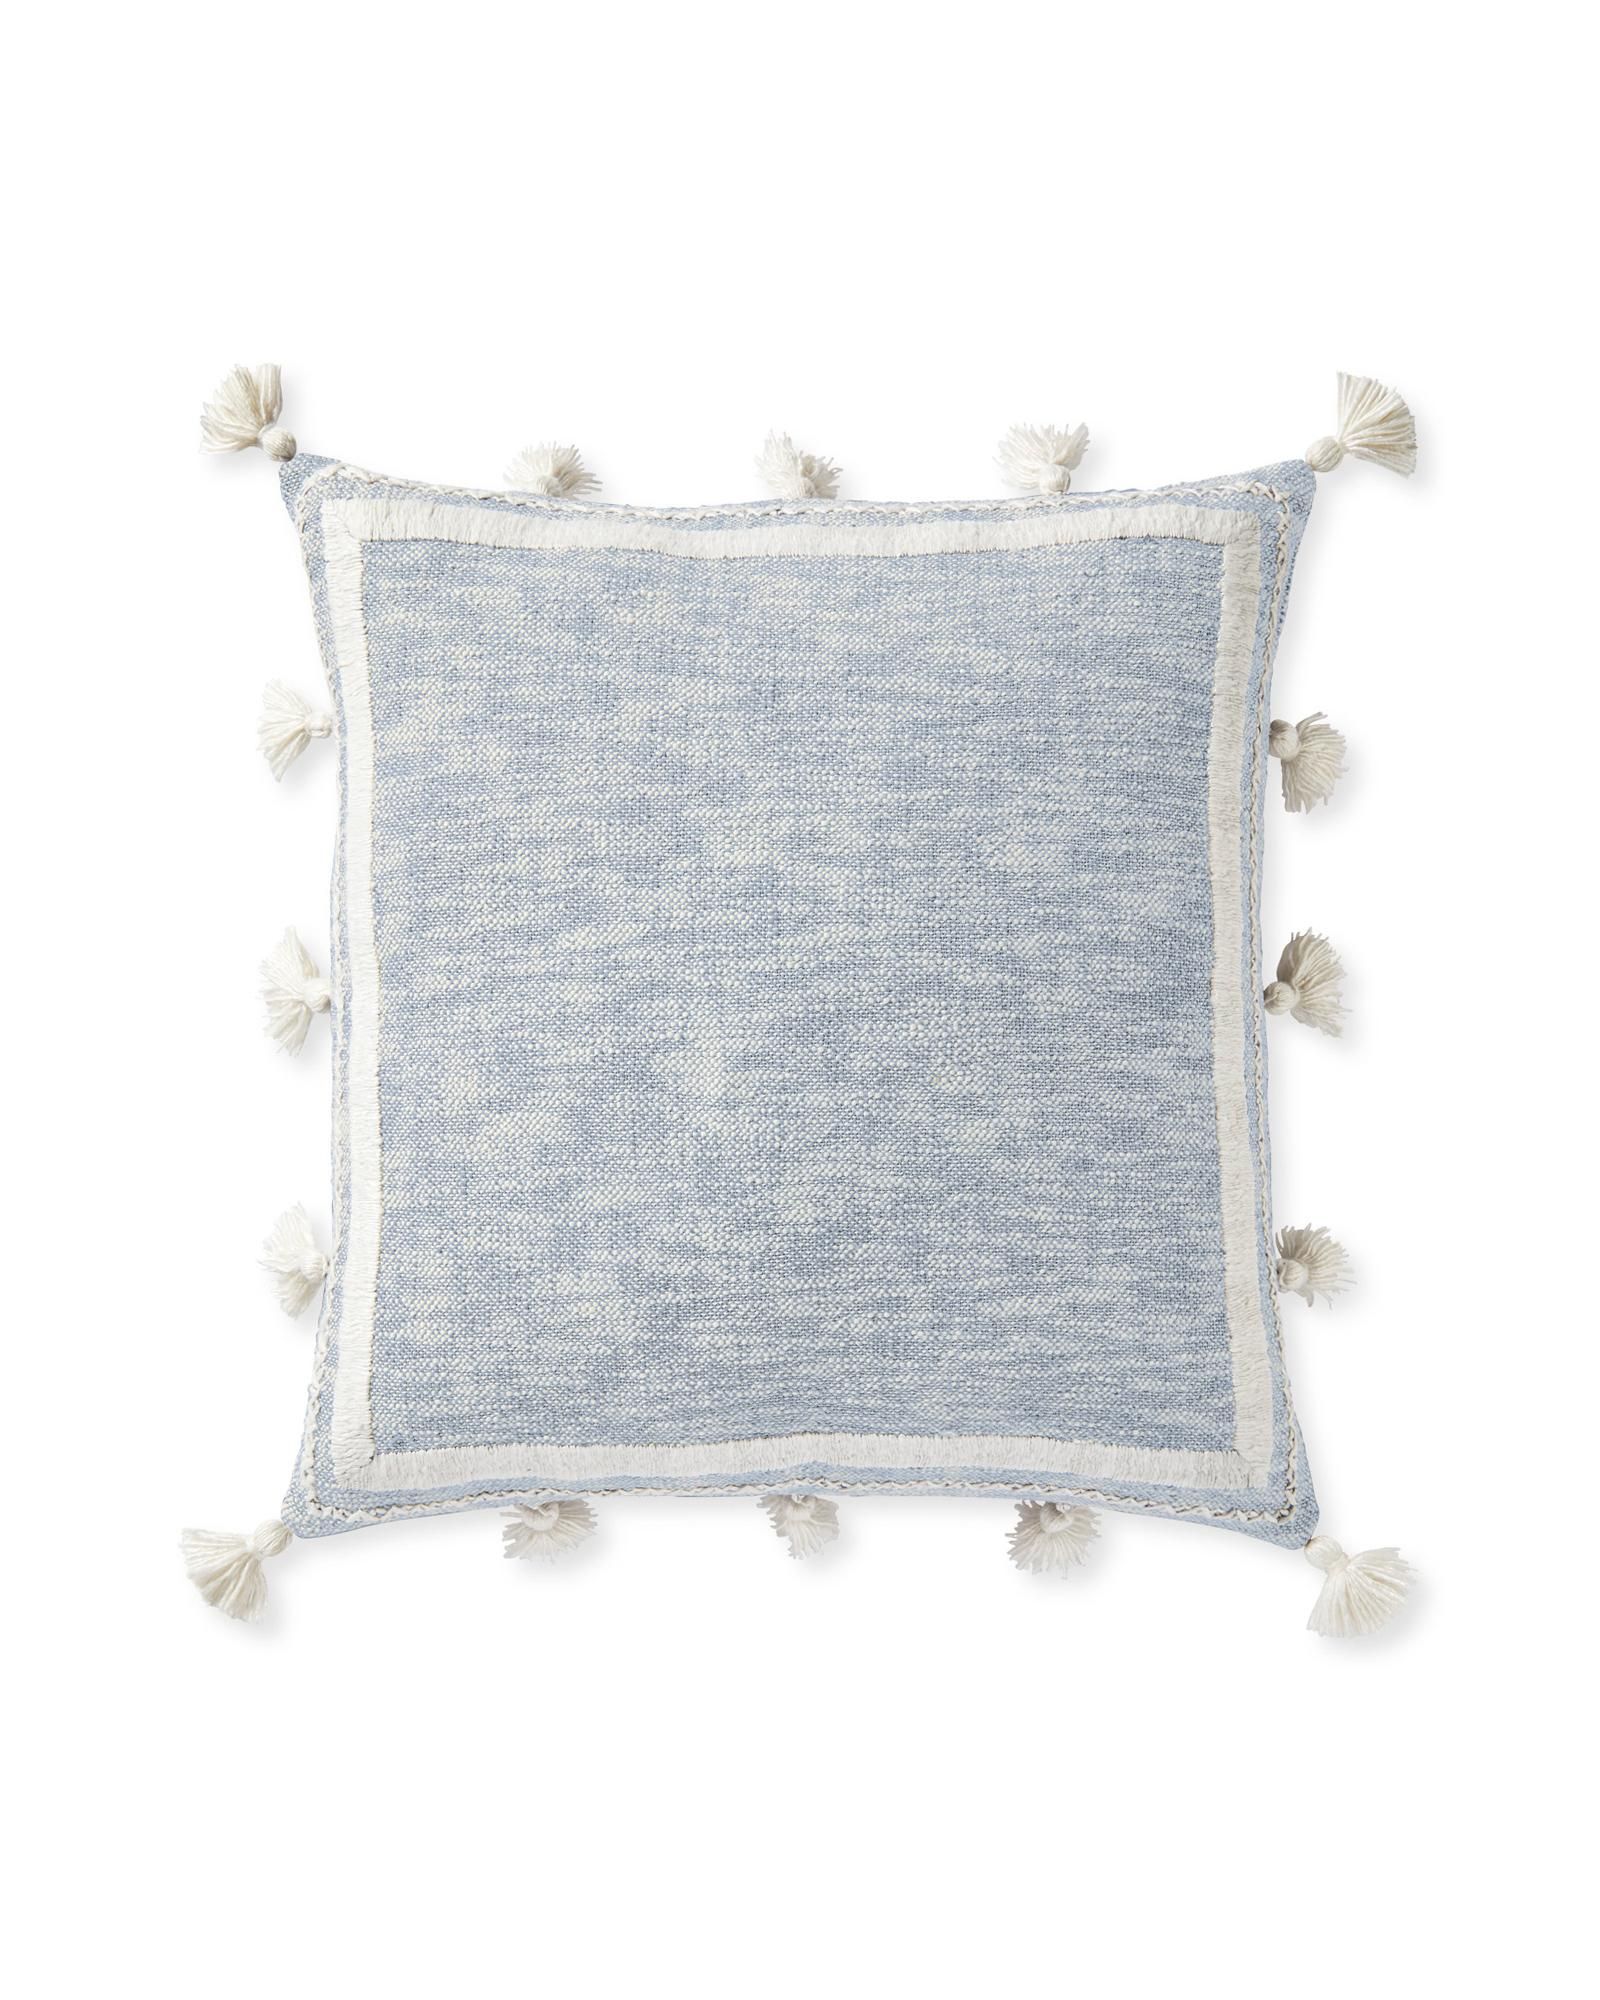 Tahoma Pillow Cover | Serena and Lily